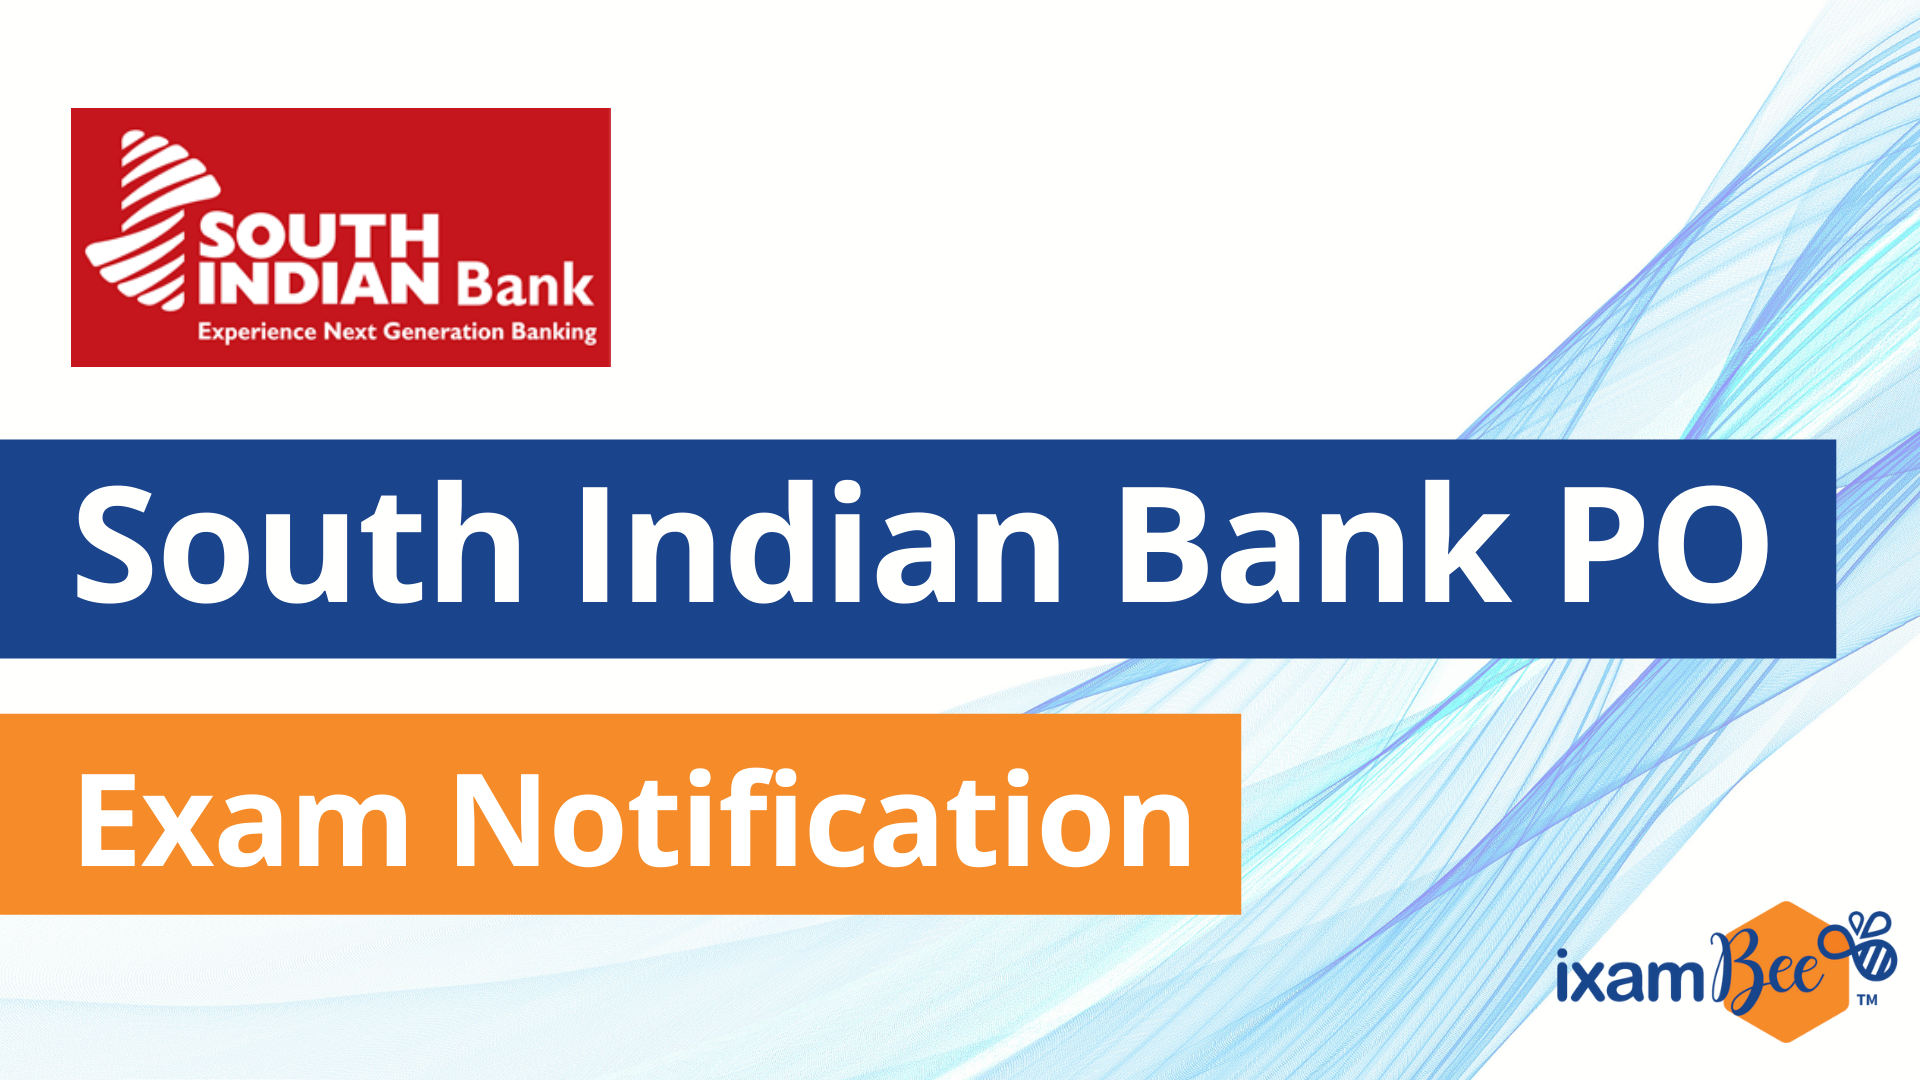 South Indian Bank PO Exam Notification